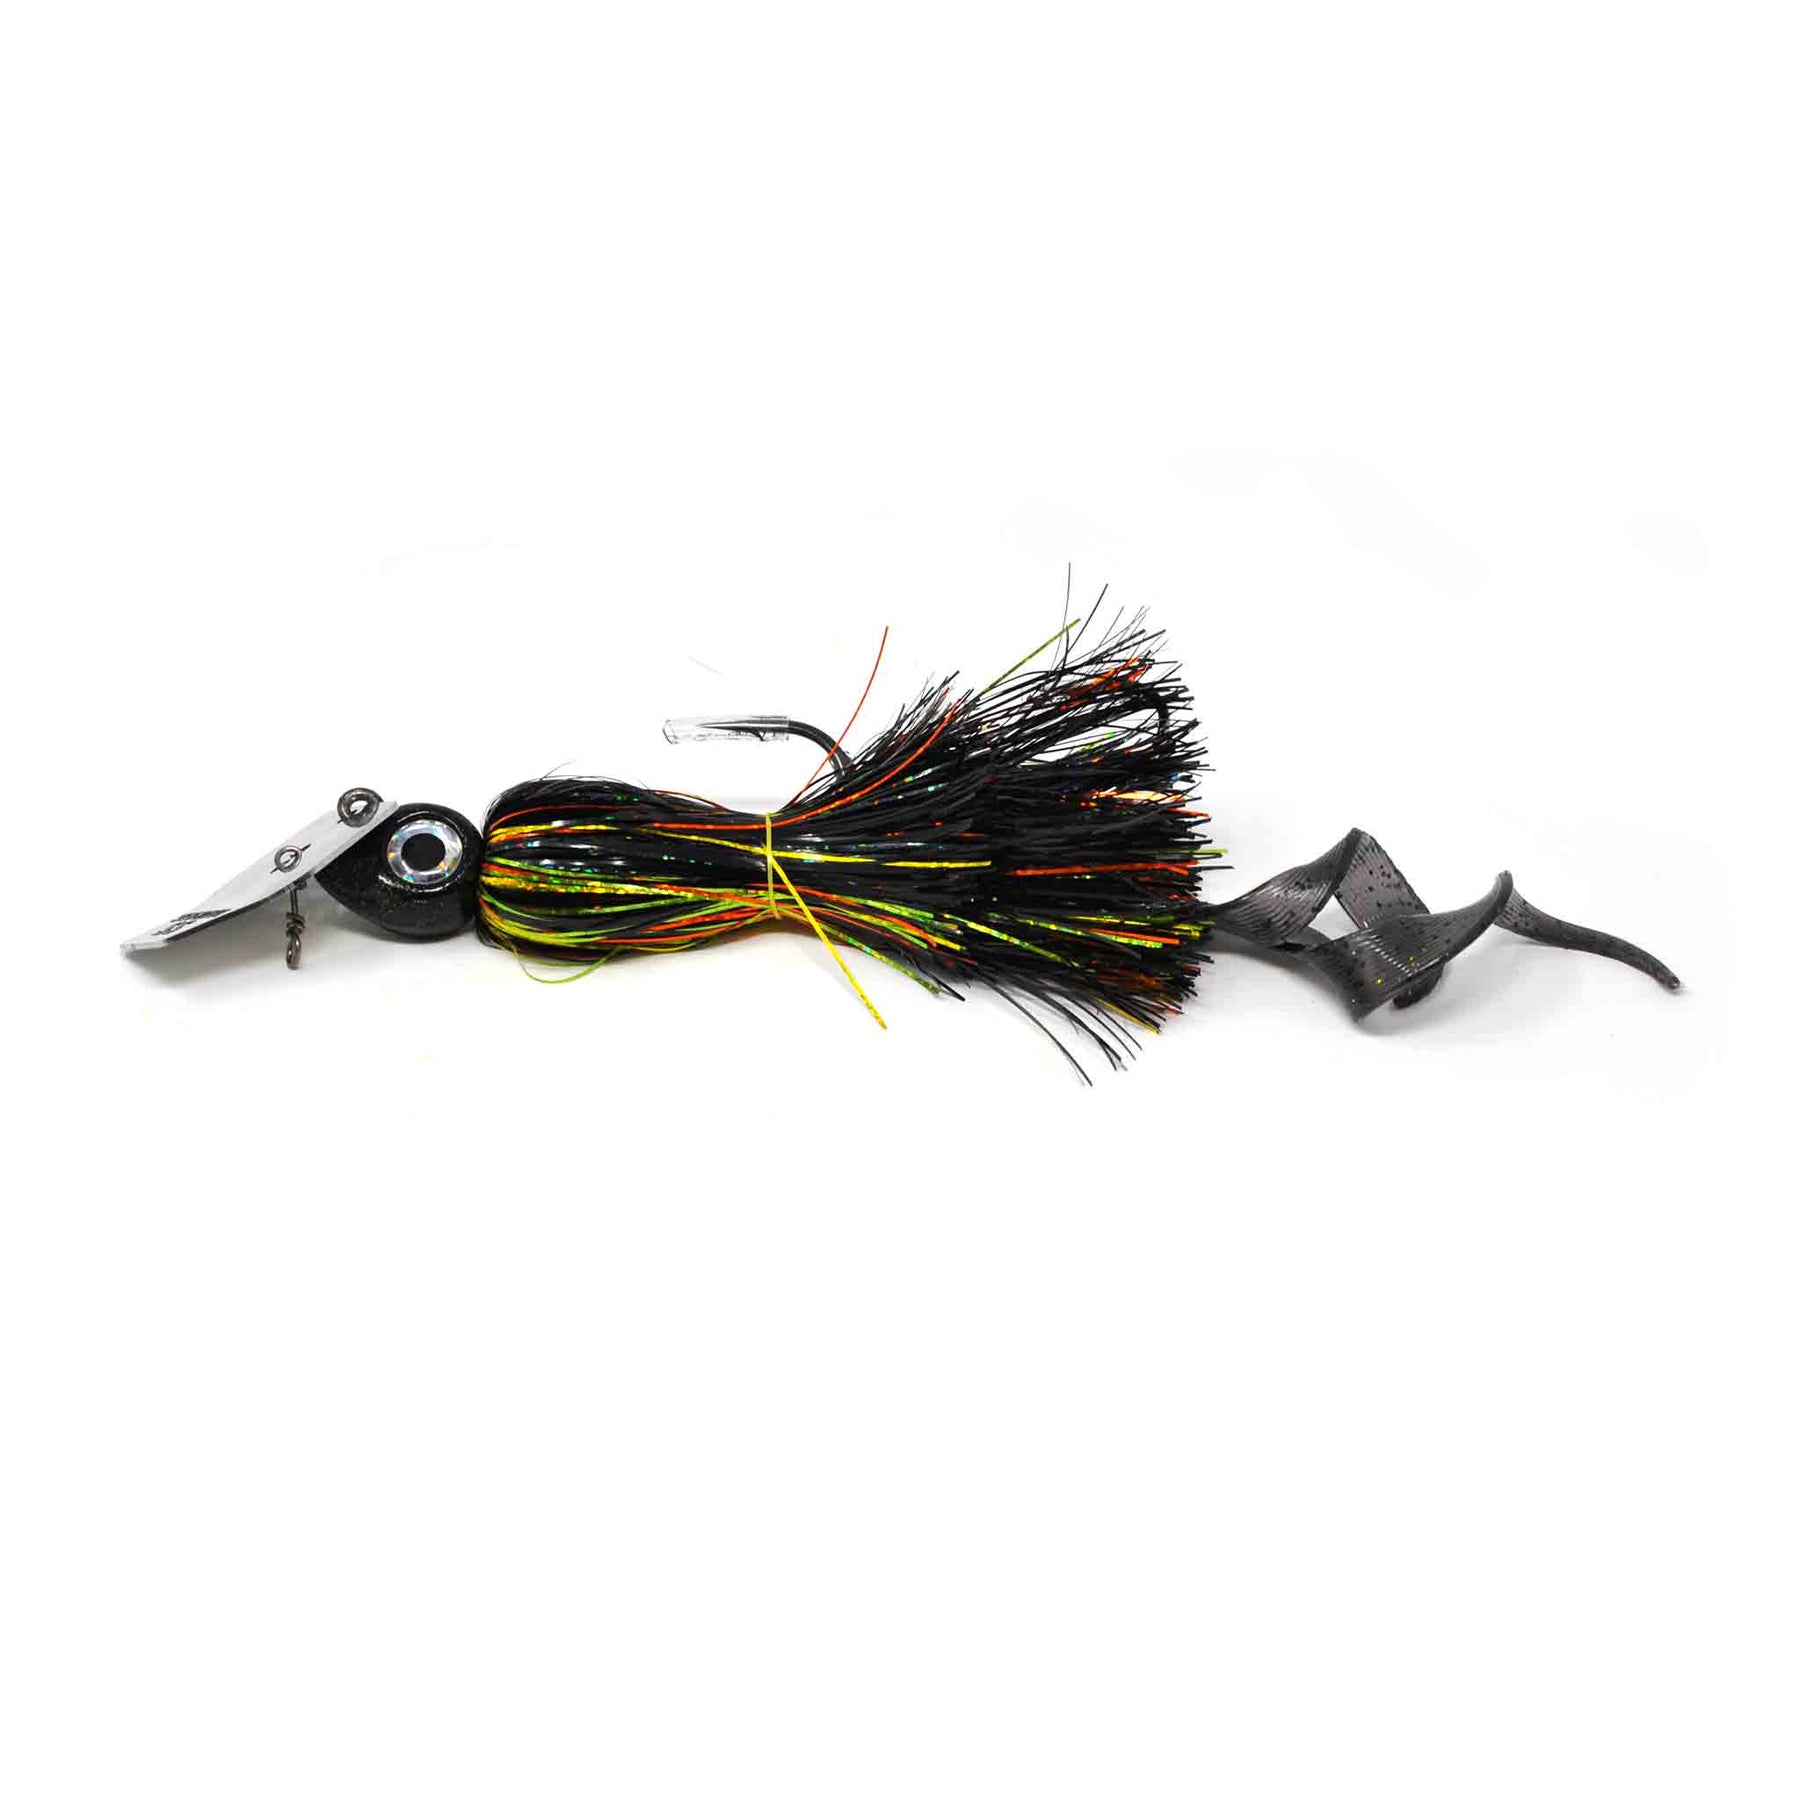 SS Leurres Sky-Candy Chatterbait 5oz Black Perch Chatterbaits